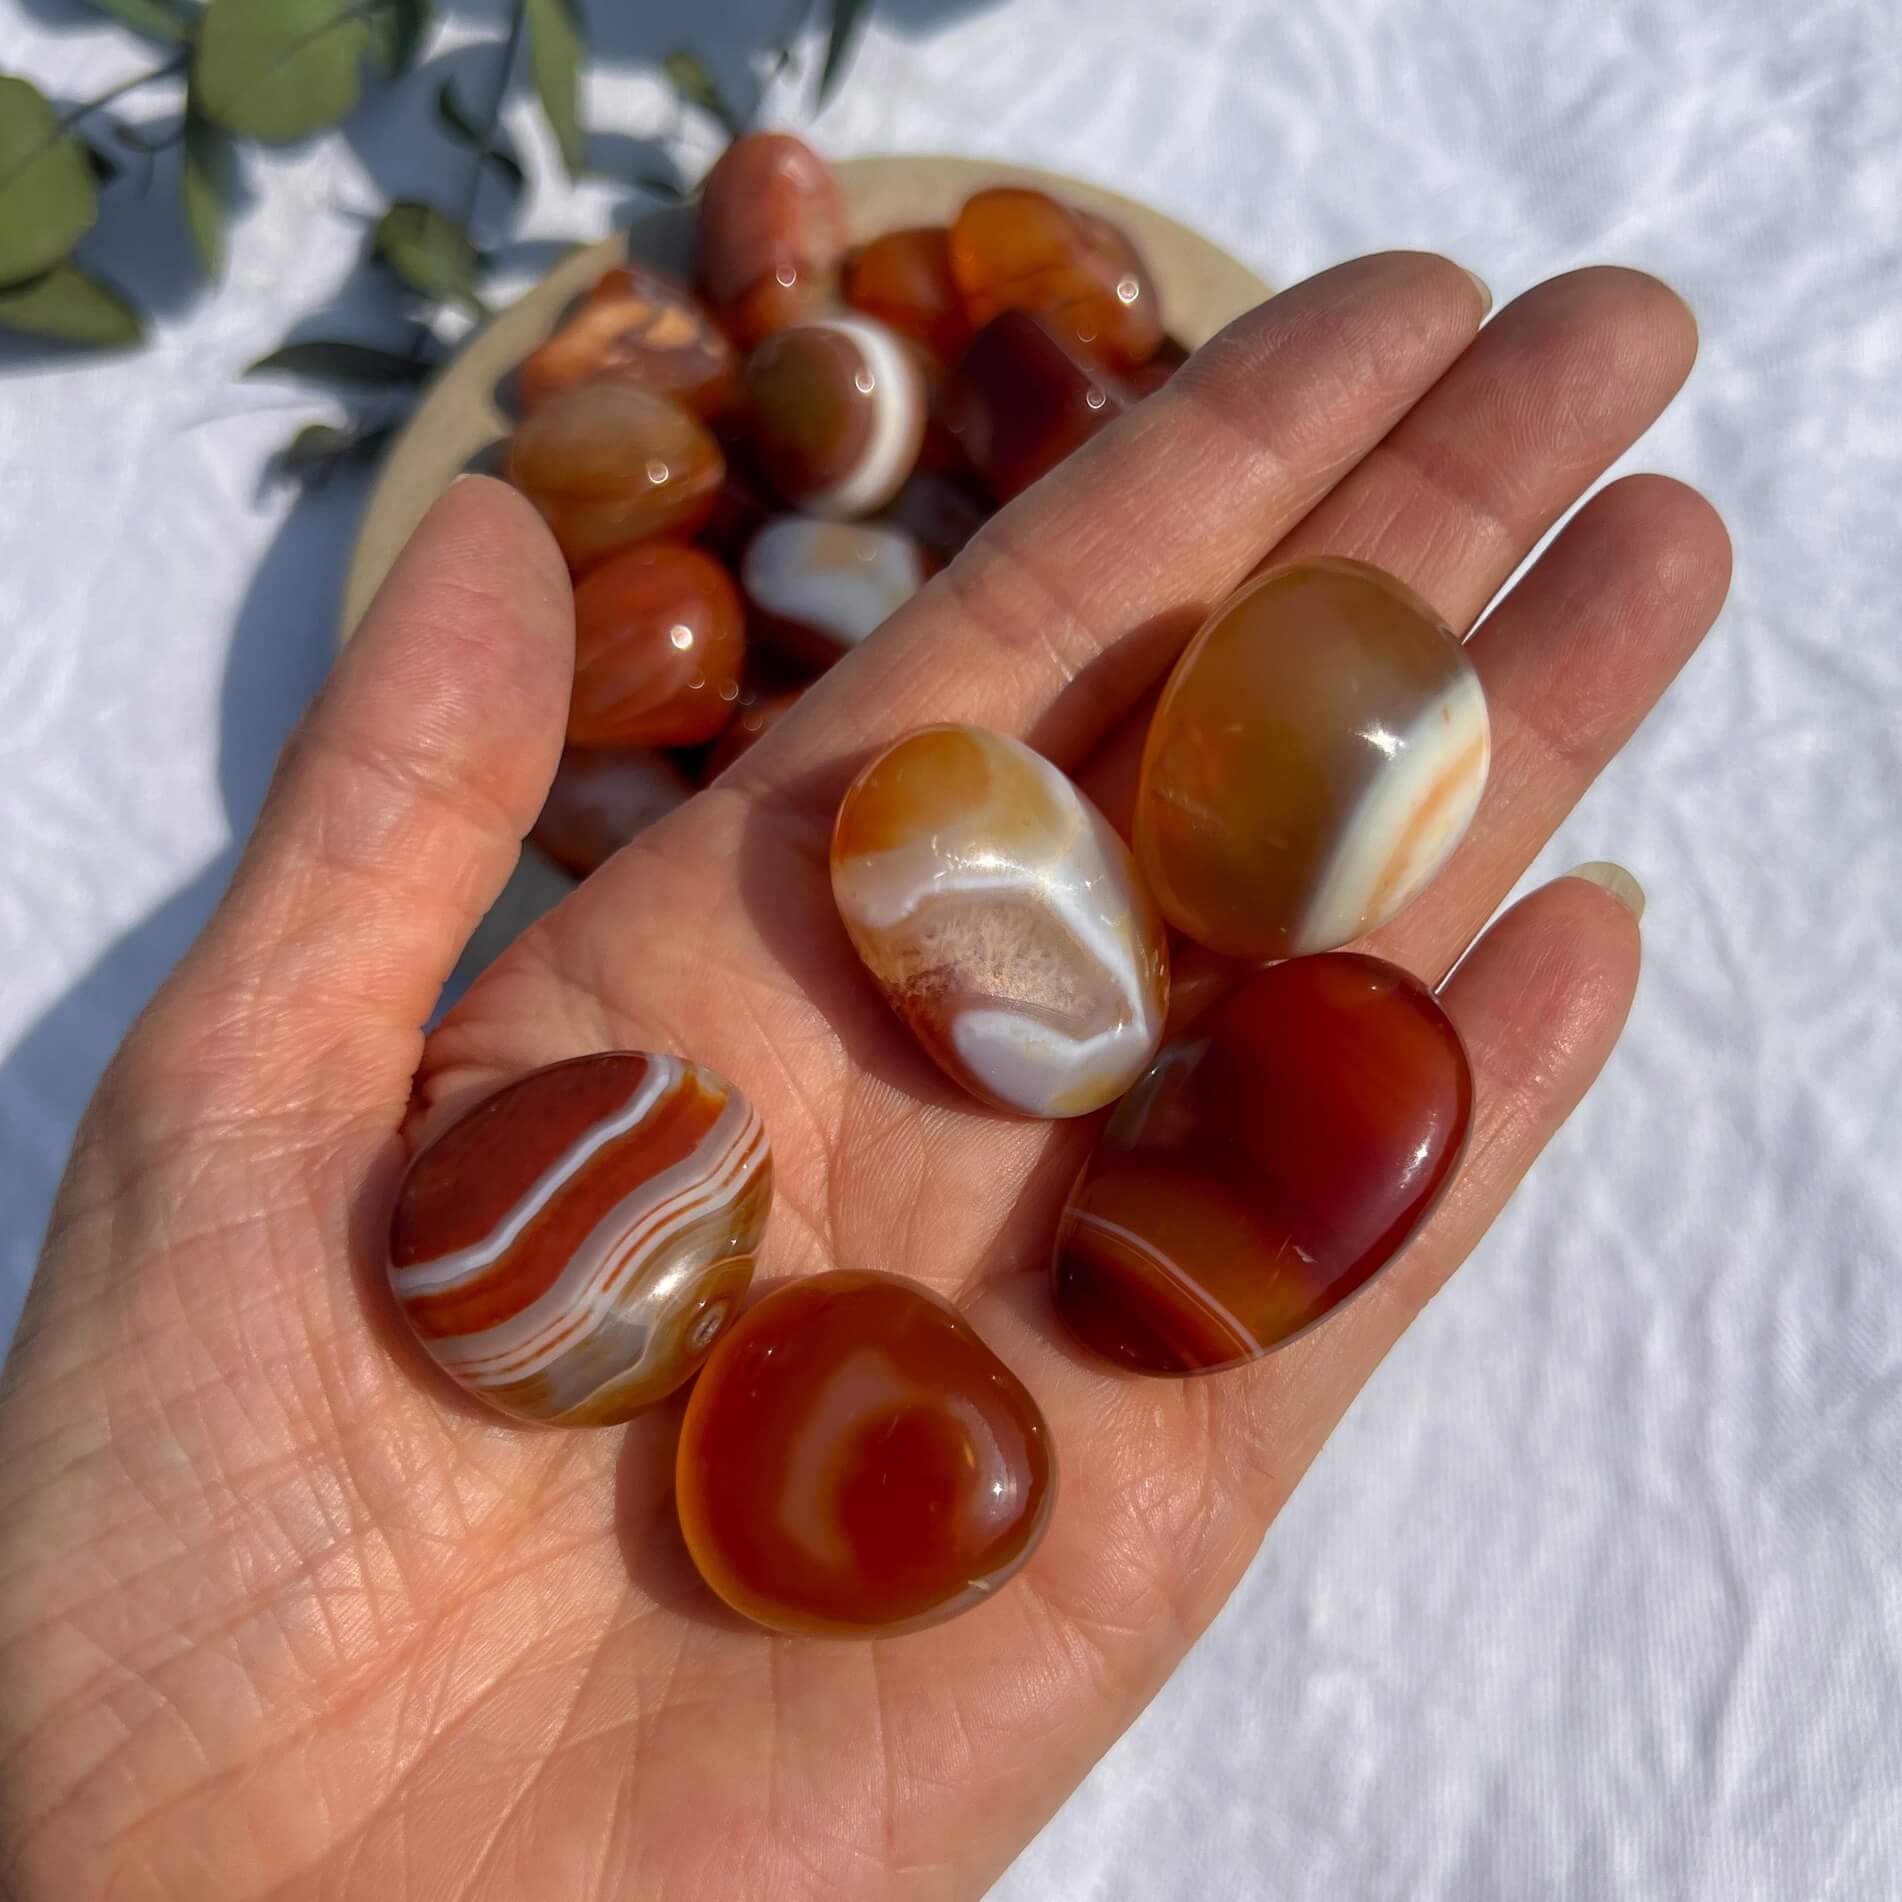 A handful of vibrant red and orange patterned carnelian crystal tumblestones